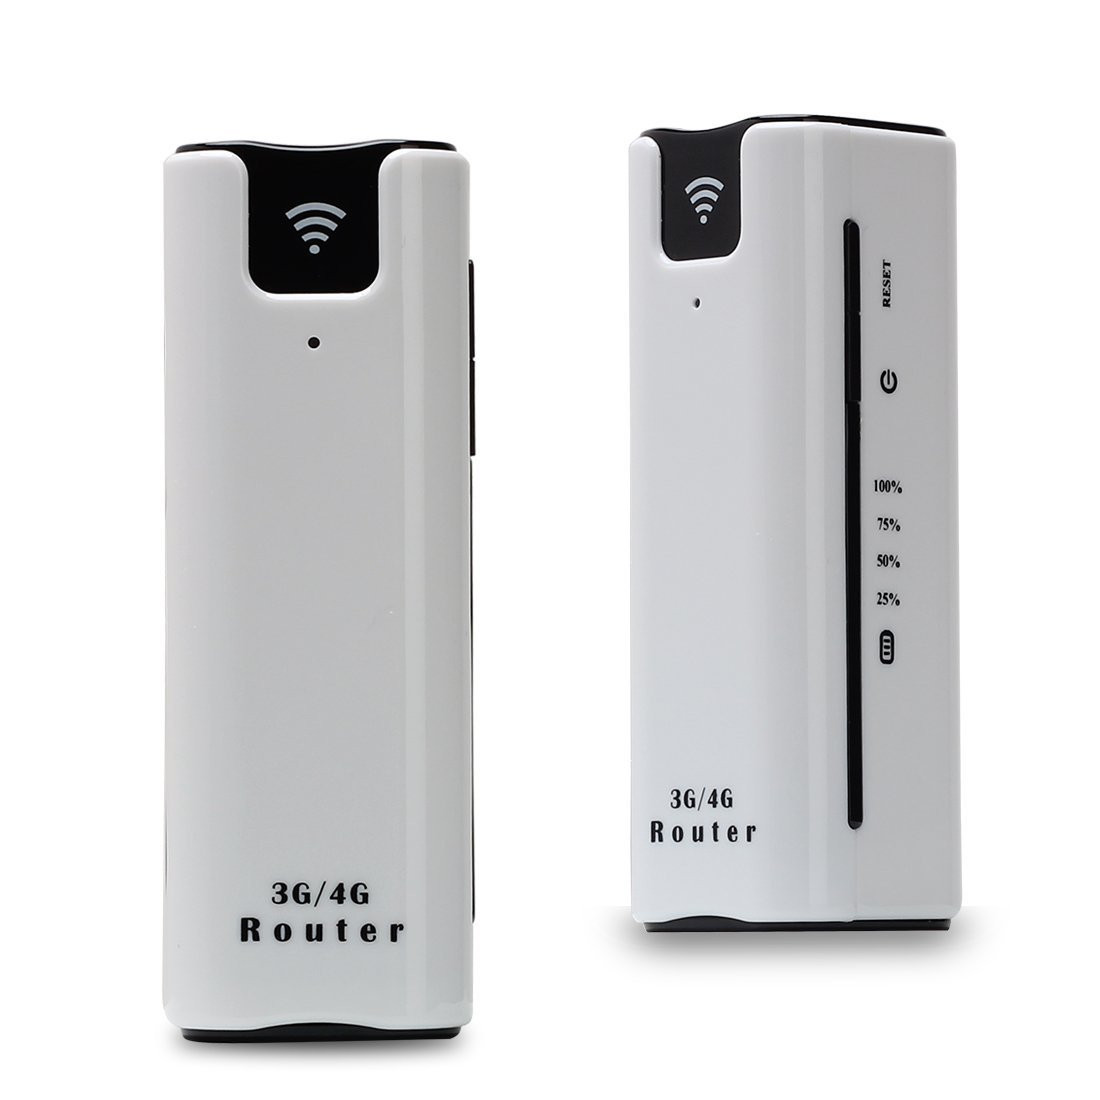 Buy cheap cheap 3g wifi Router product